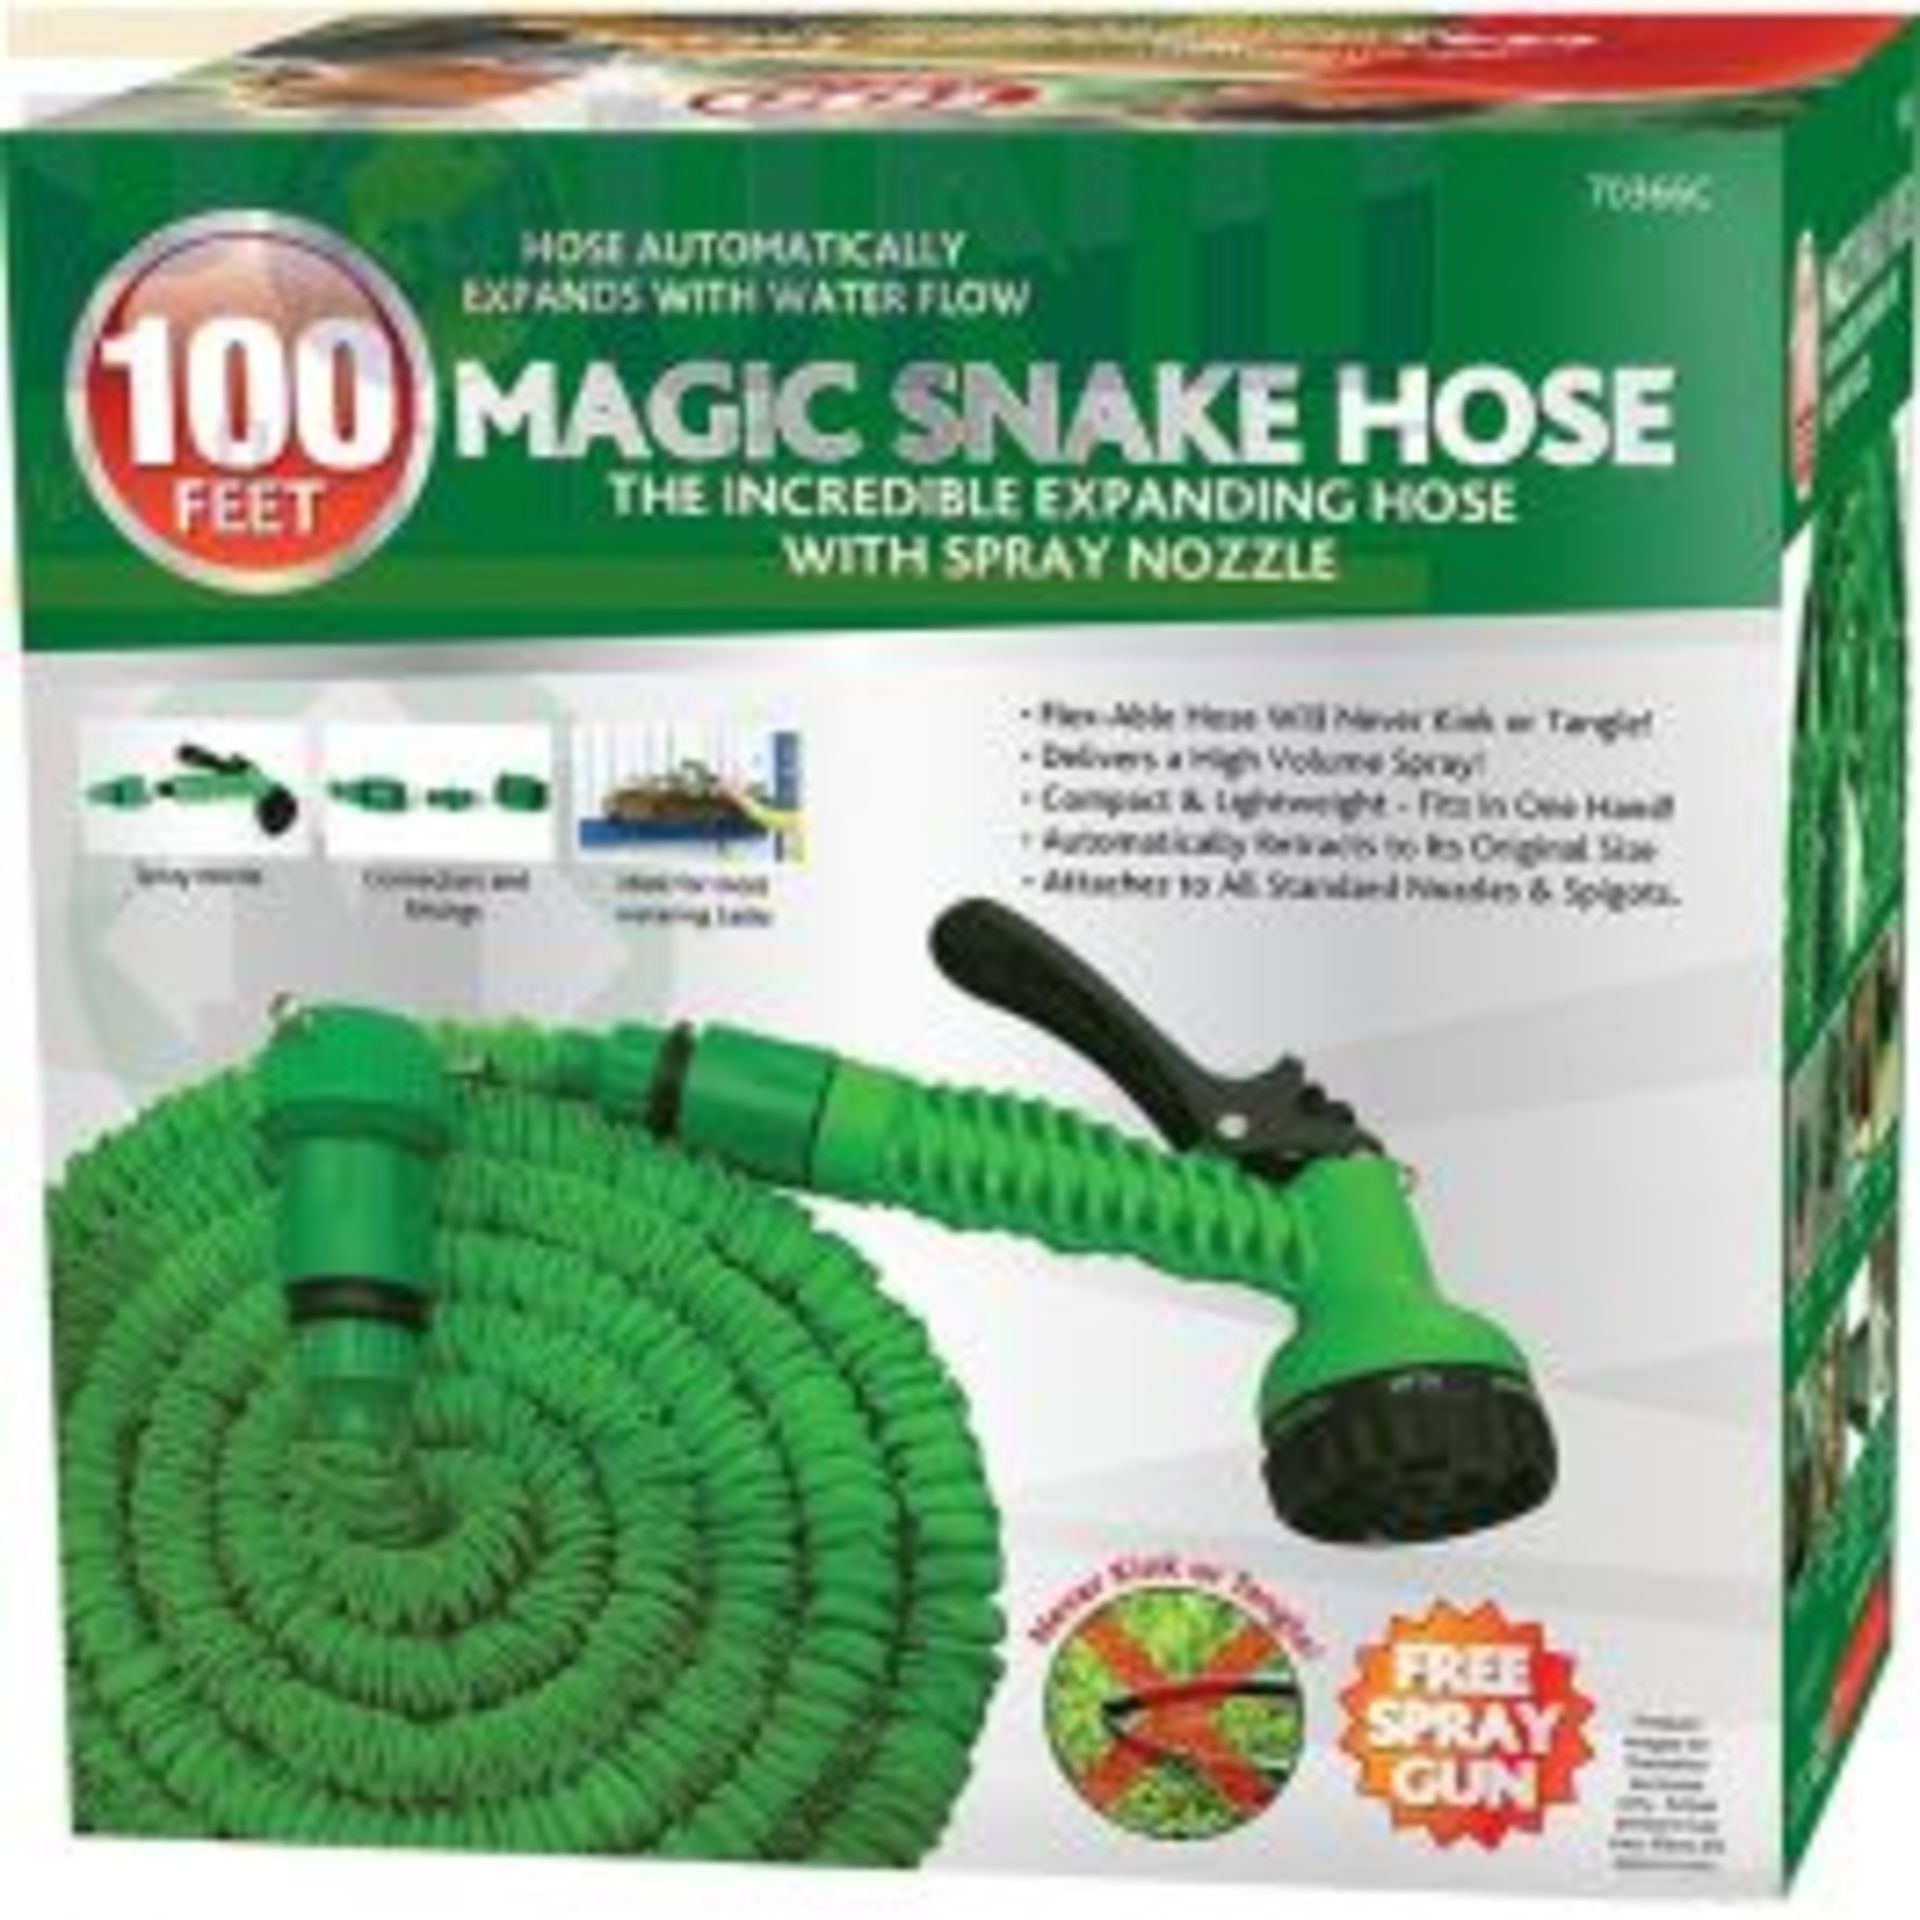 NEW 100FT MAGIC EXPANDING HOSE WITH SPRAY GUN HEAD - Image 2 of 2